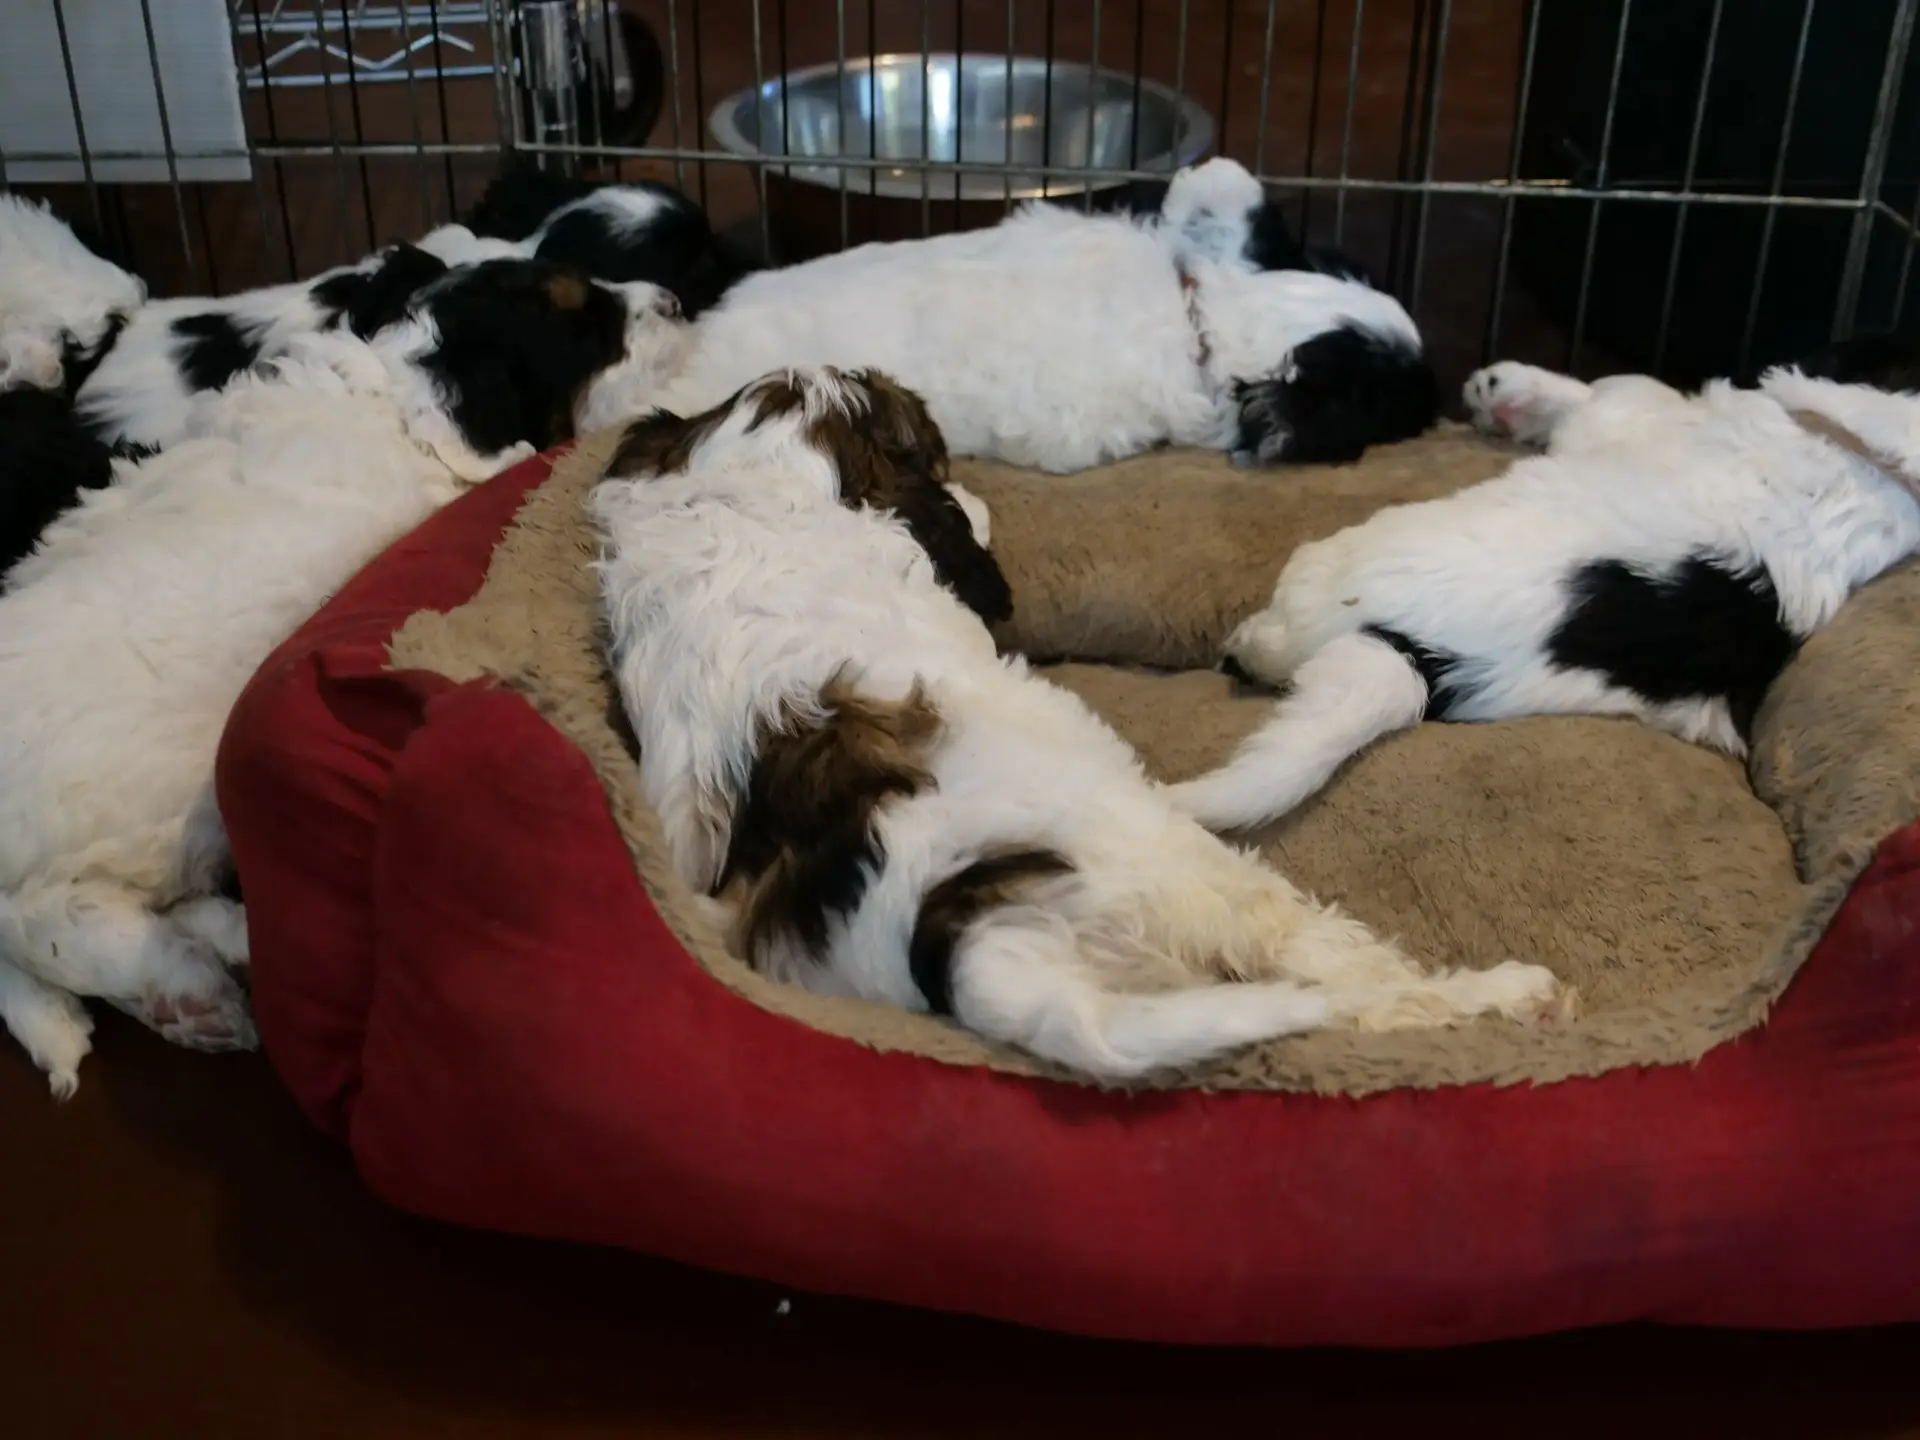 Dark red dog bed with 5-week old labradoodle puppies lying across it. Center of image is the back end of a white puppy with a patch of black/copper on its lower back, and black ears visible in the background. 3 other puppies are visible, mostly white with patches of black.